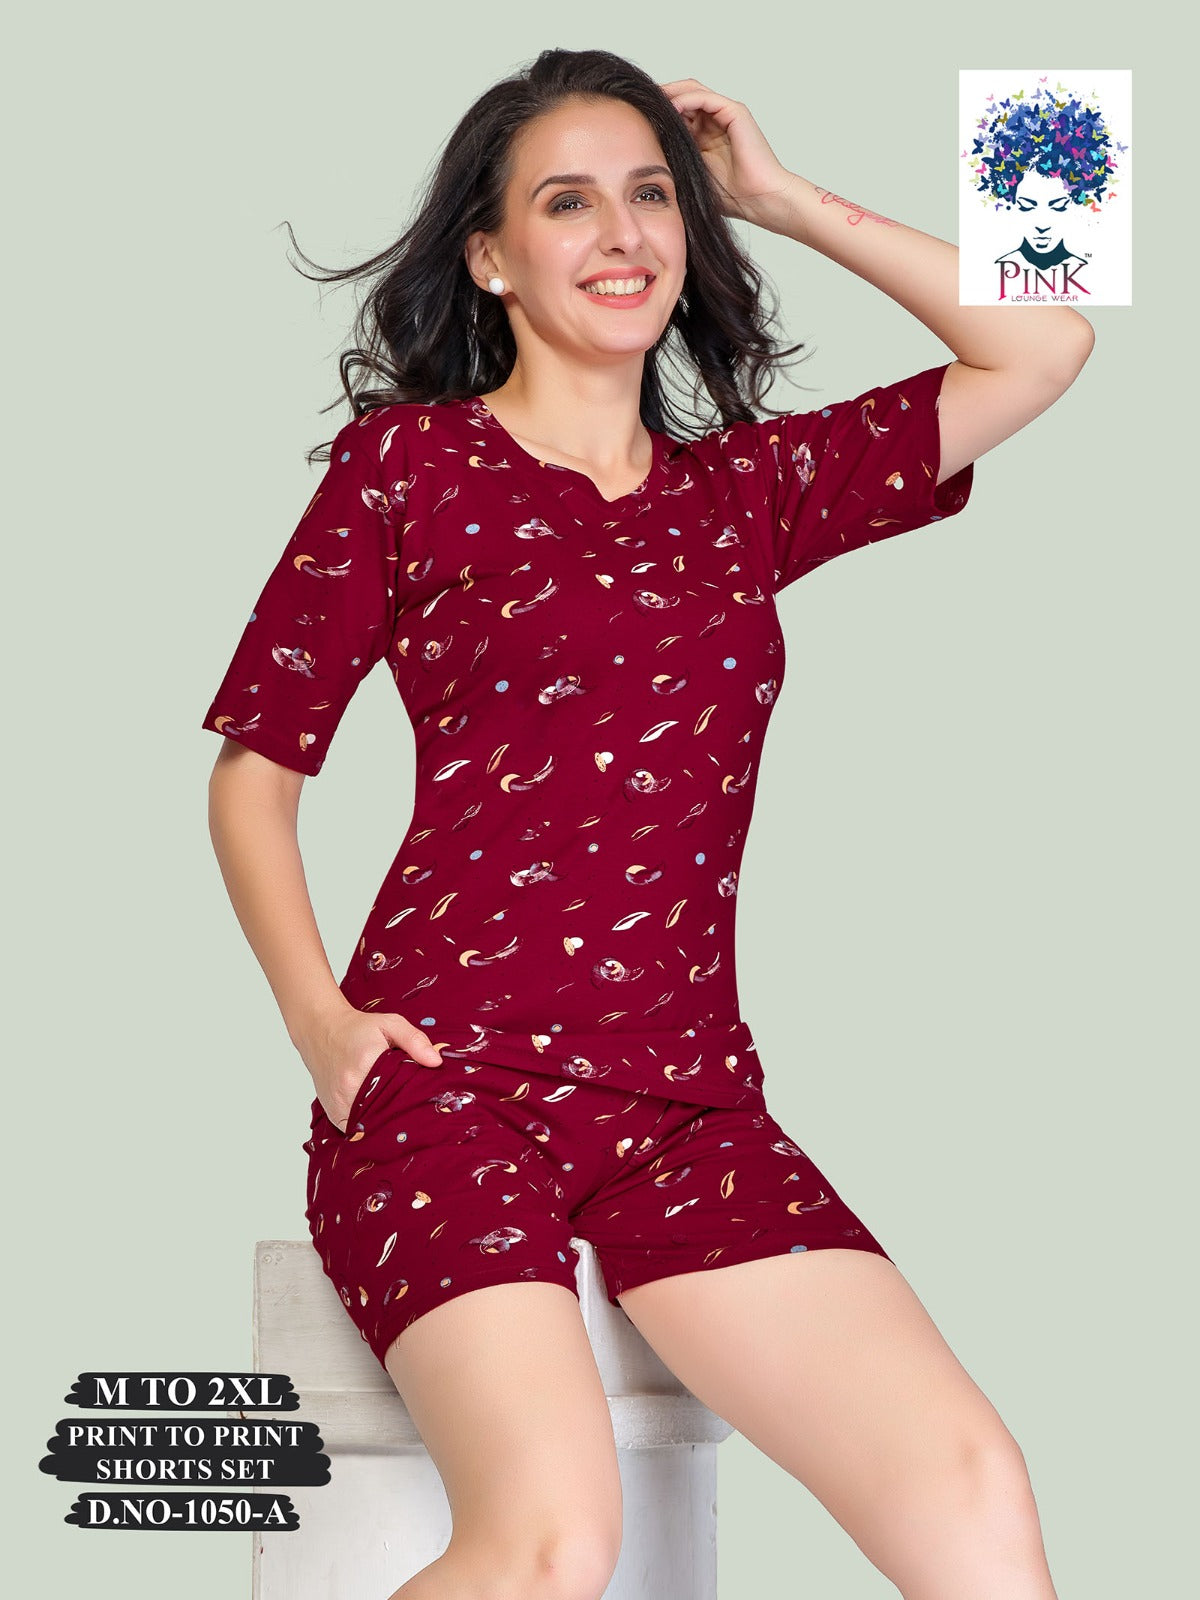 1050-A Pink Hosiery Cotton Shorts Night Suits Supplier India